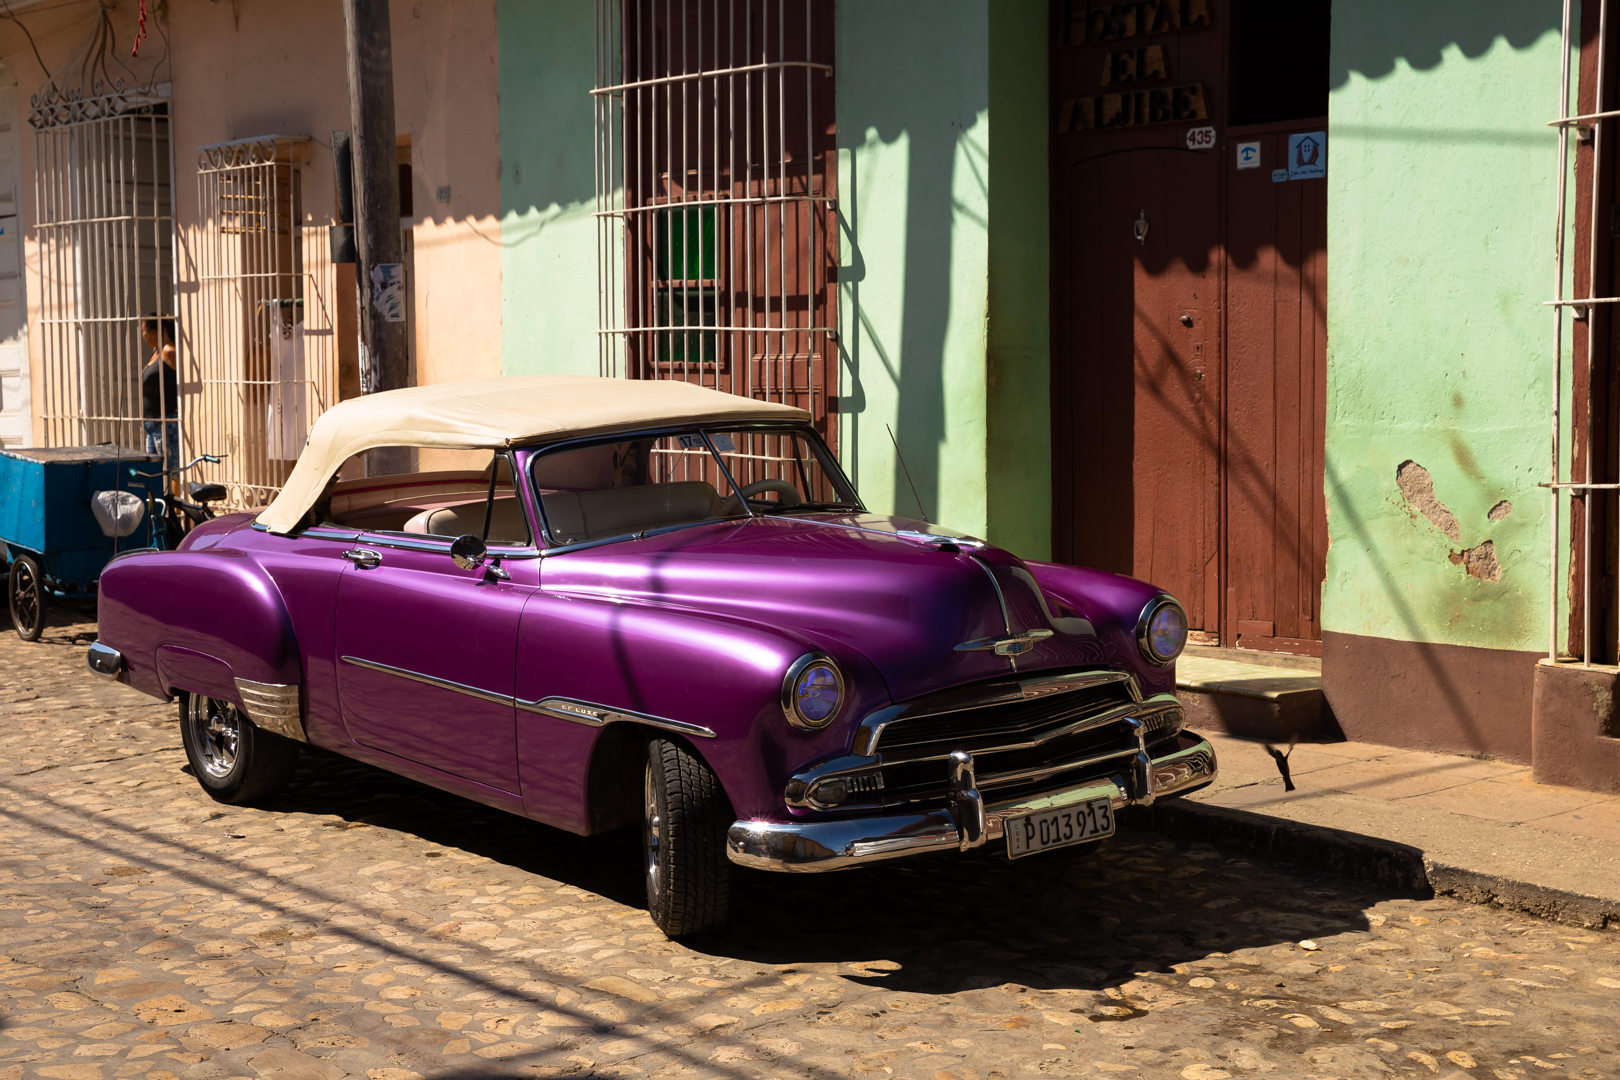 Important things to know before you visit Cuba - Stay at a casa particular